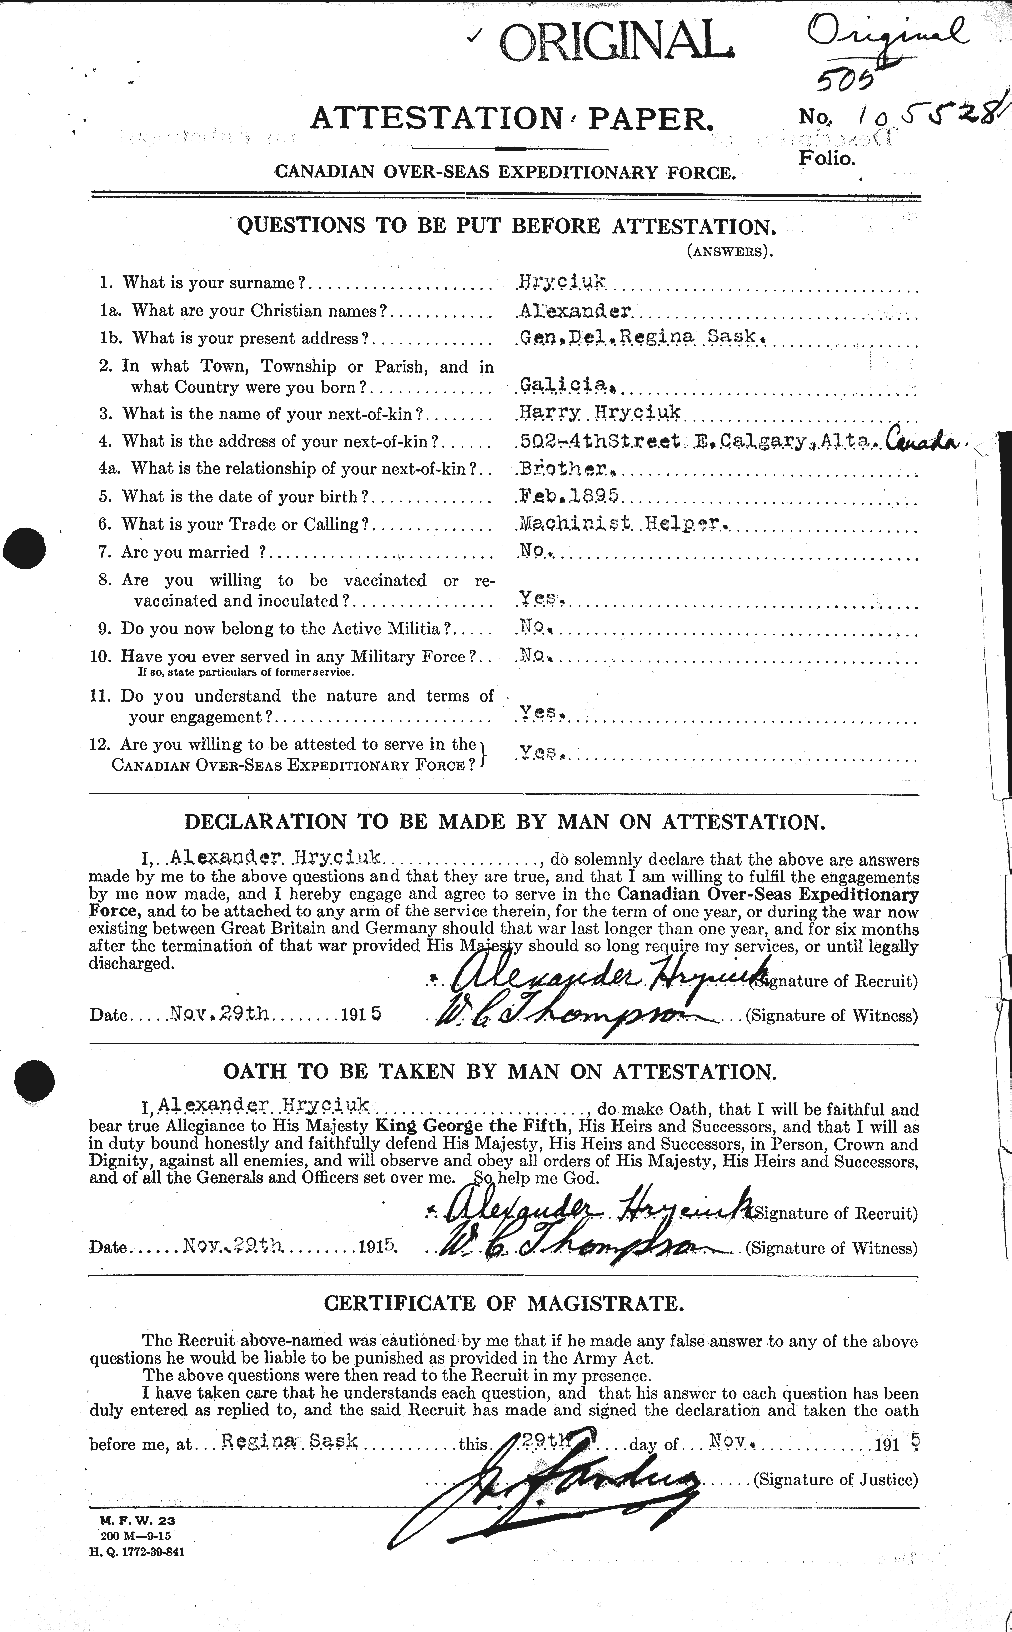 Personnel Records of the First World War - CEF 403625a